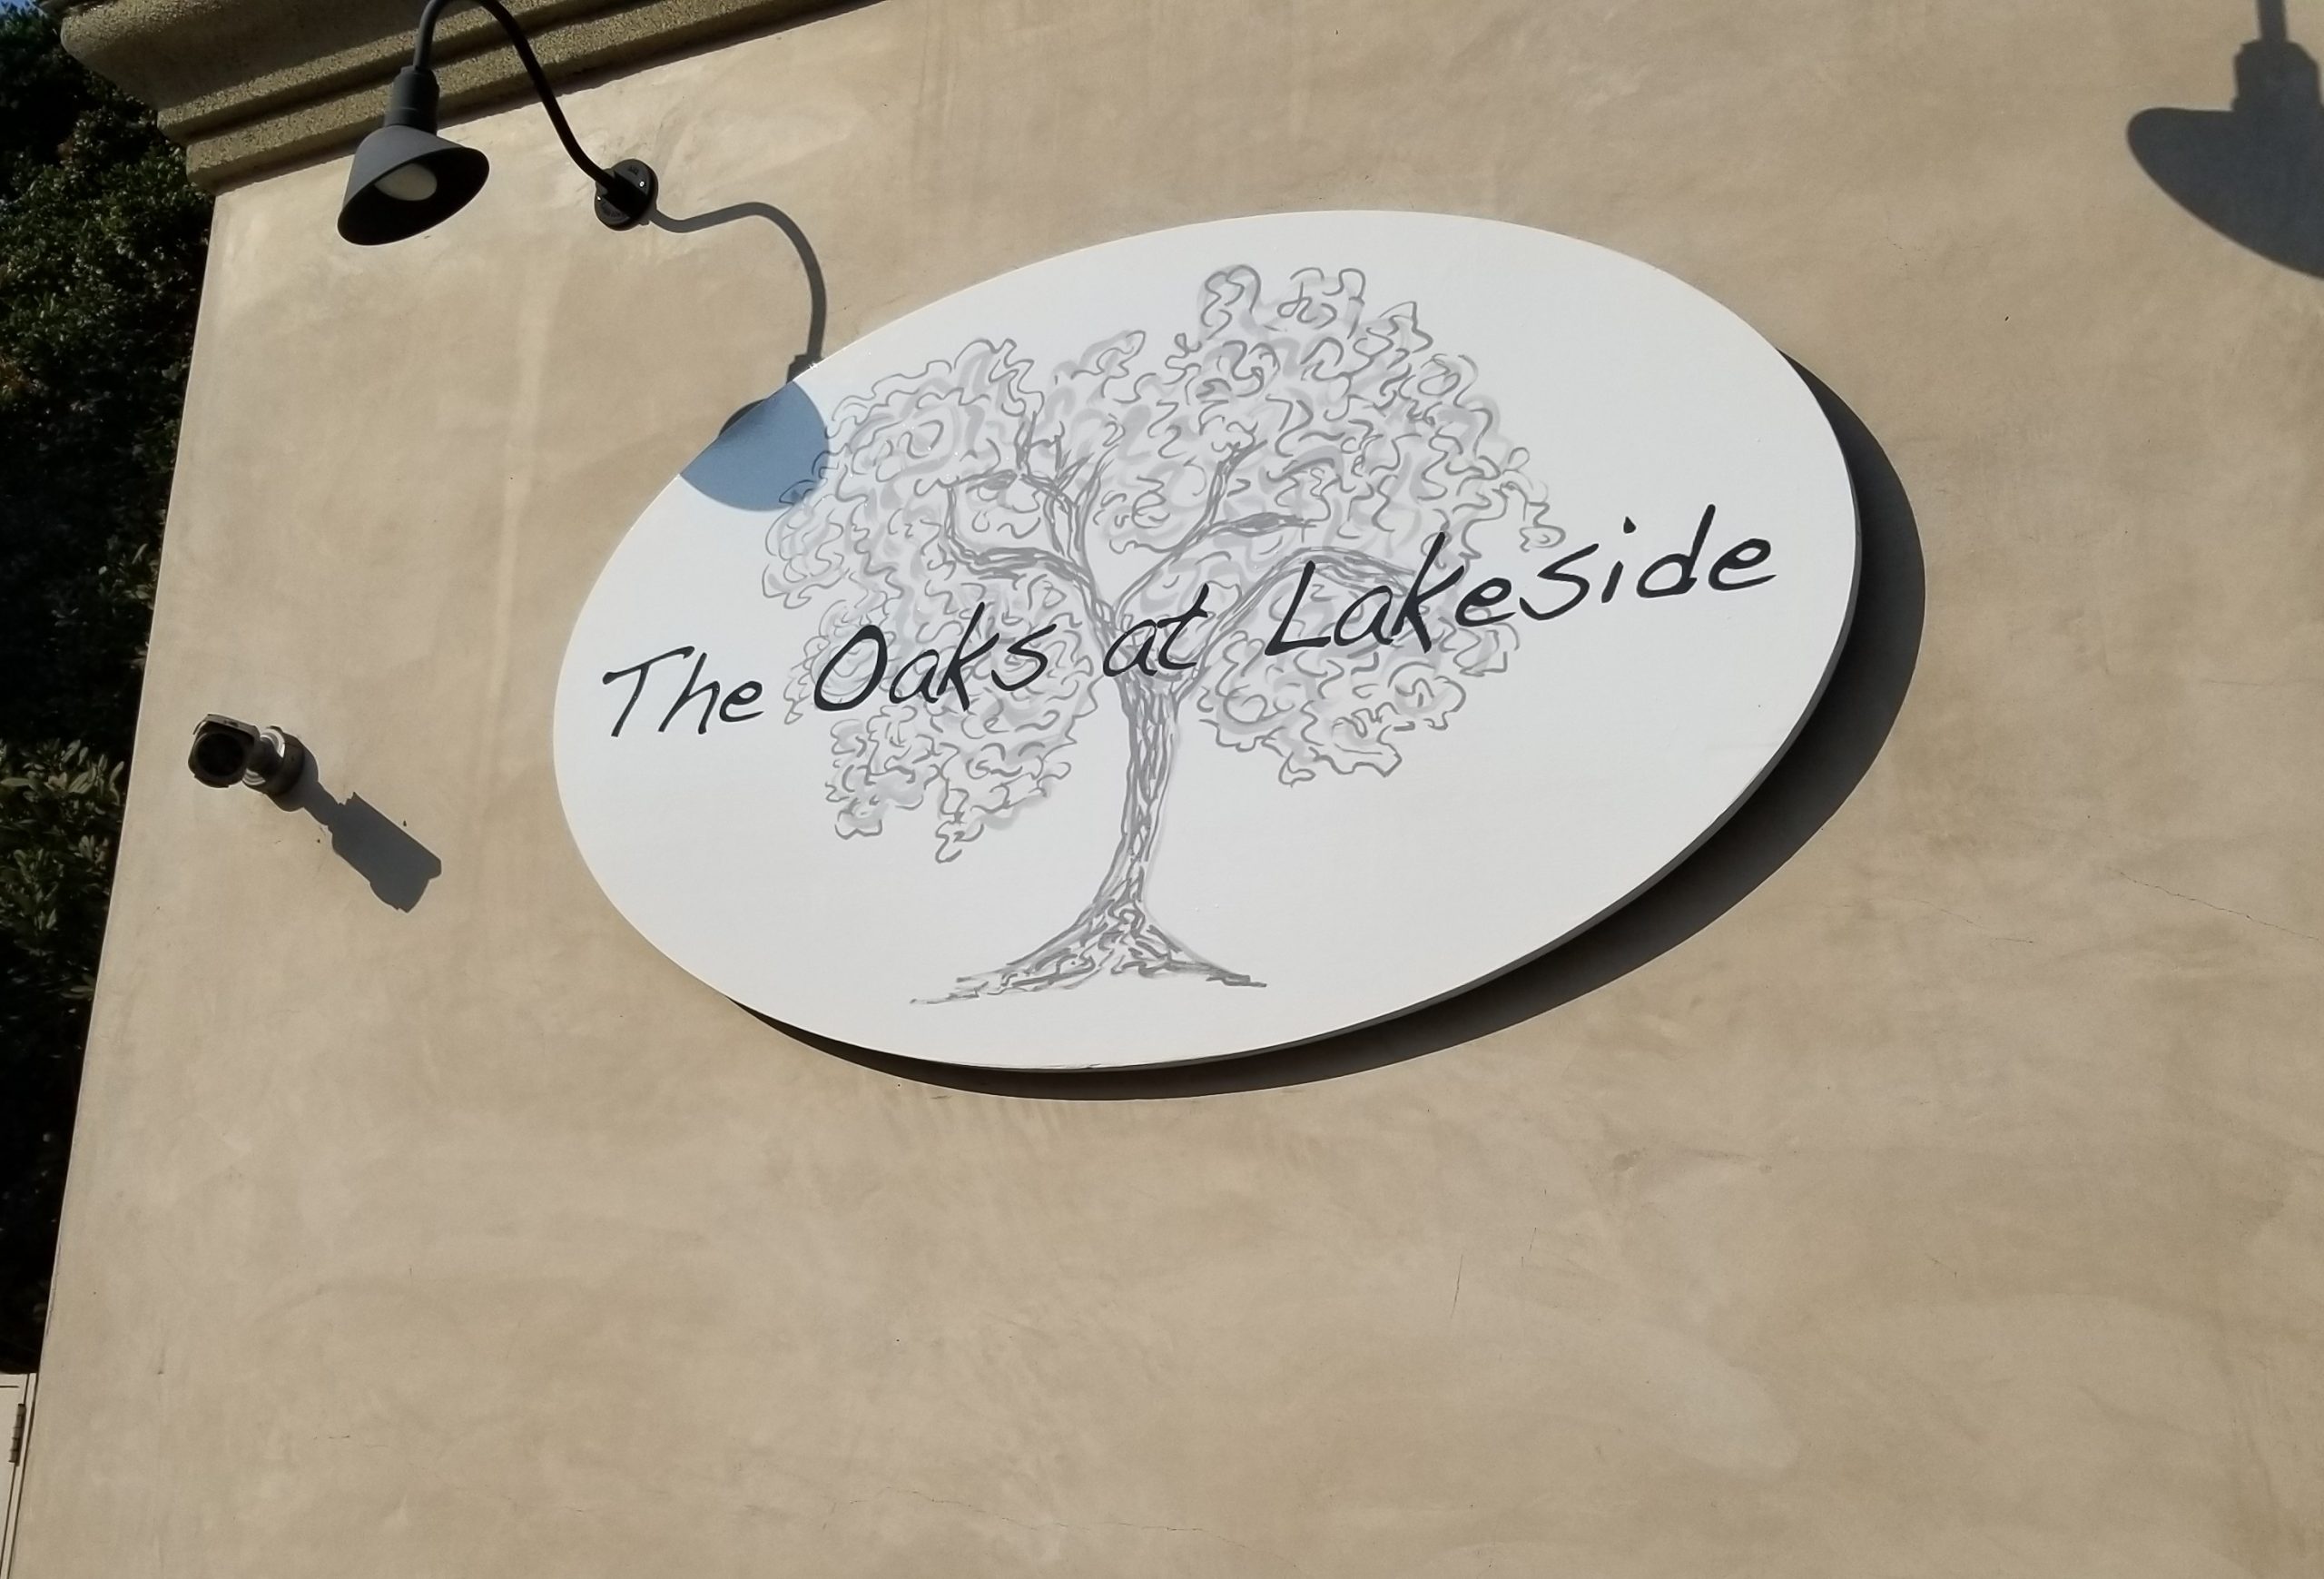 This is our custom restaurant sign for Ventura Bouevard. It shows the new branding of this beautiful Encino restaurant. The Oaks at Lakeside: A DLS Events Venue.